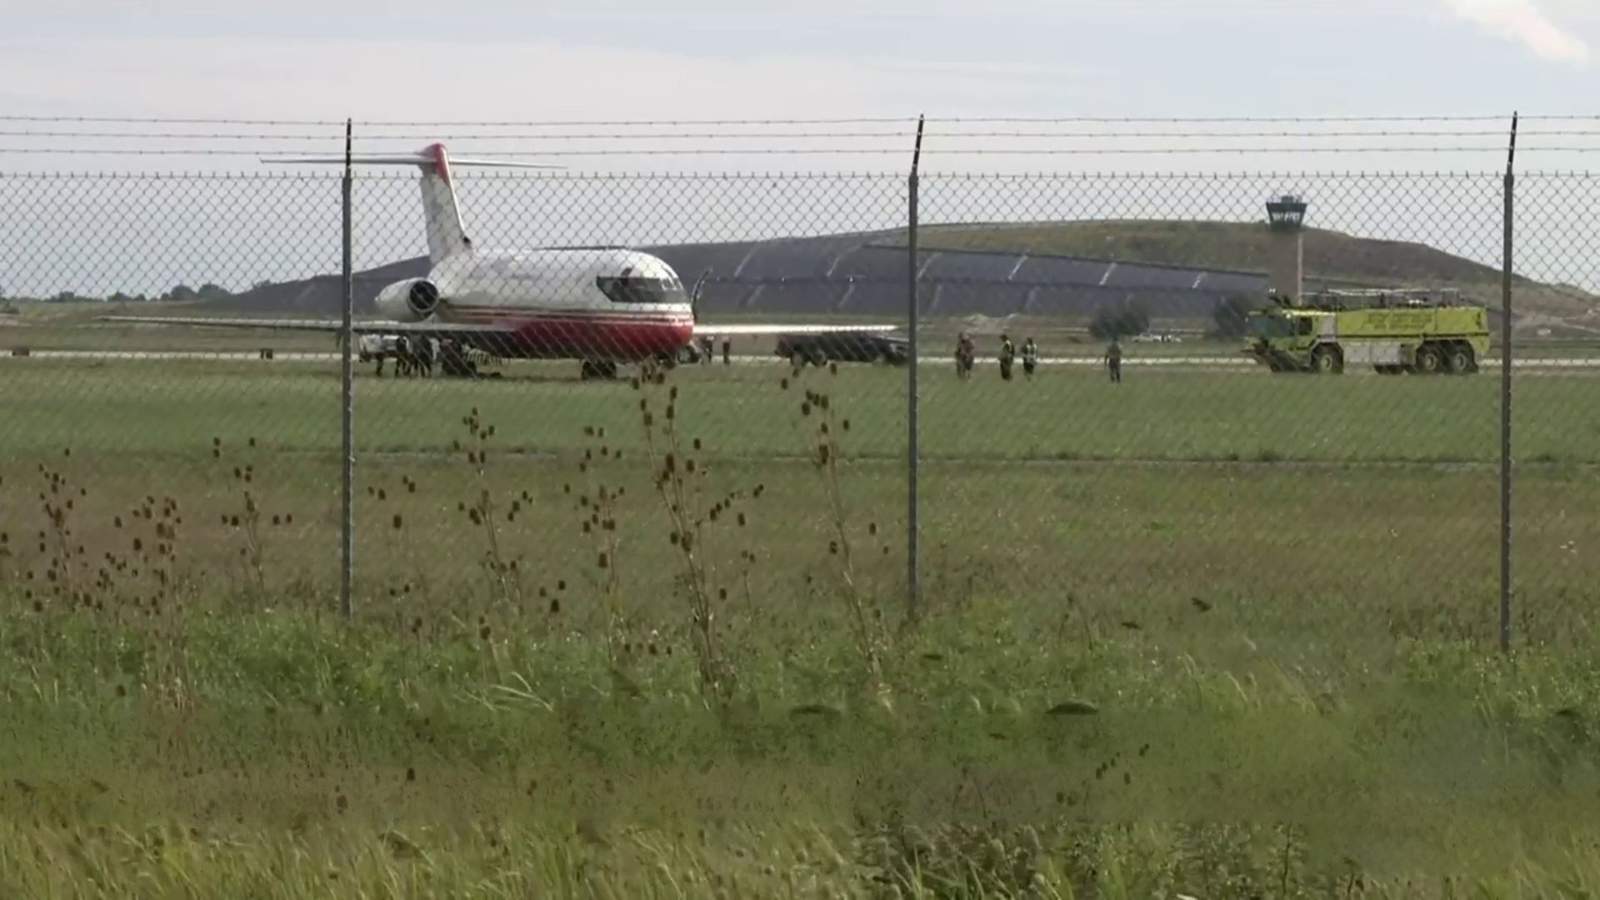 Plane goes off runway at Willow Run Airport, no injuries reported